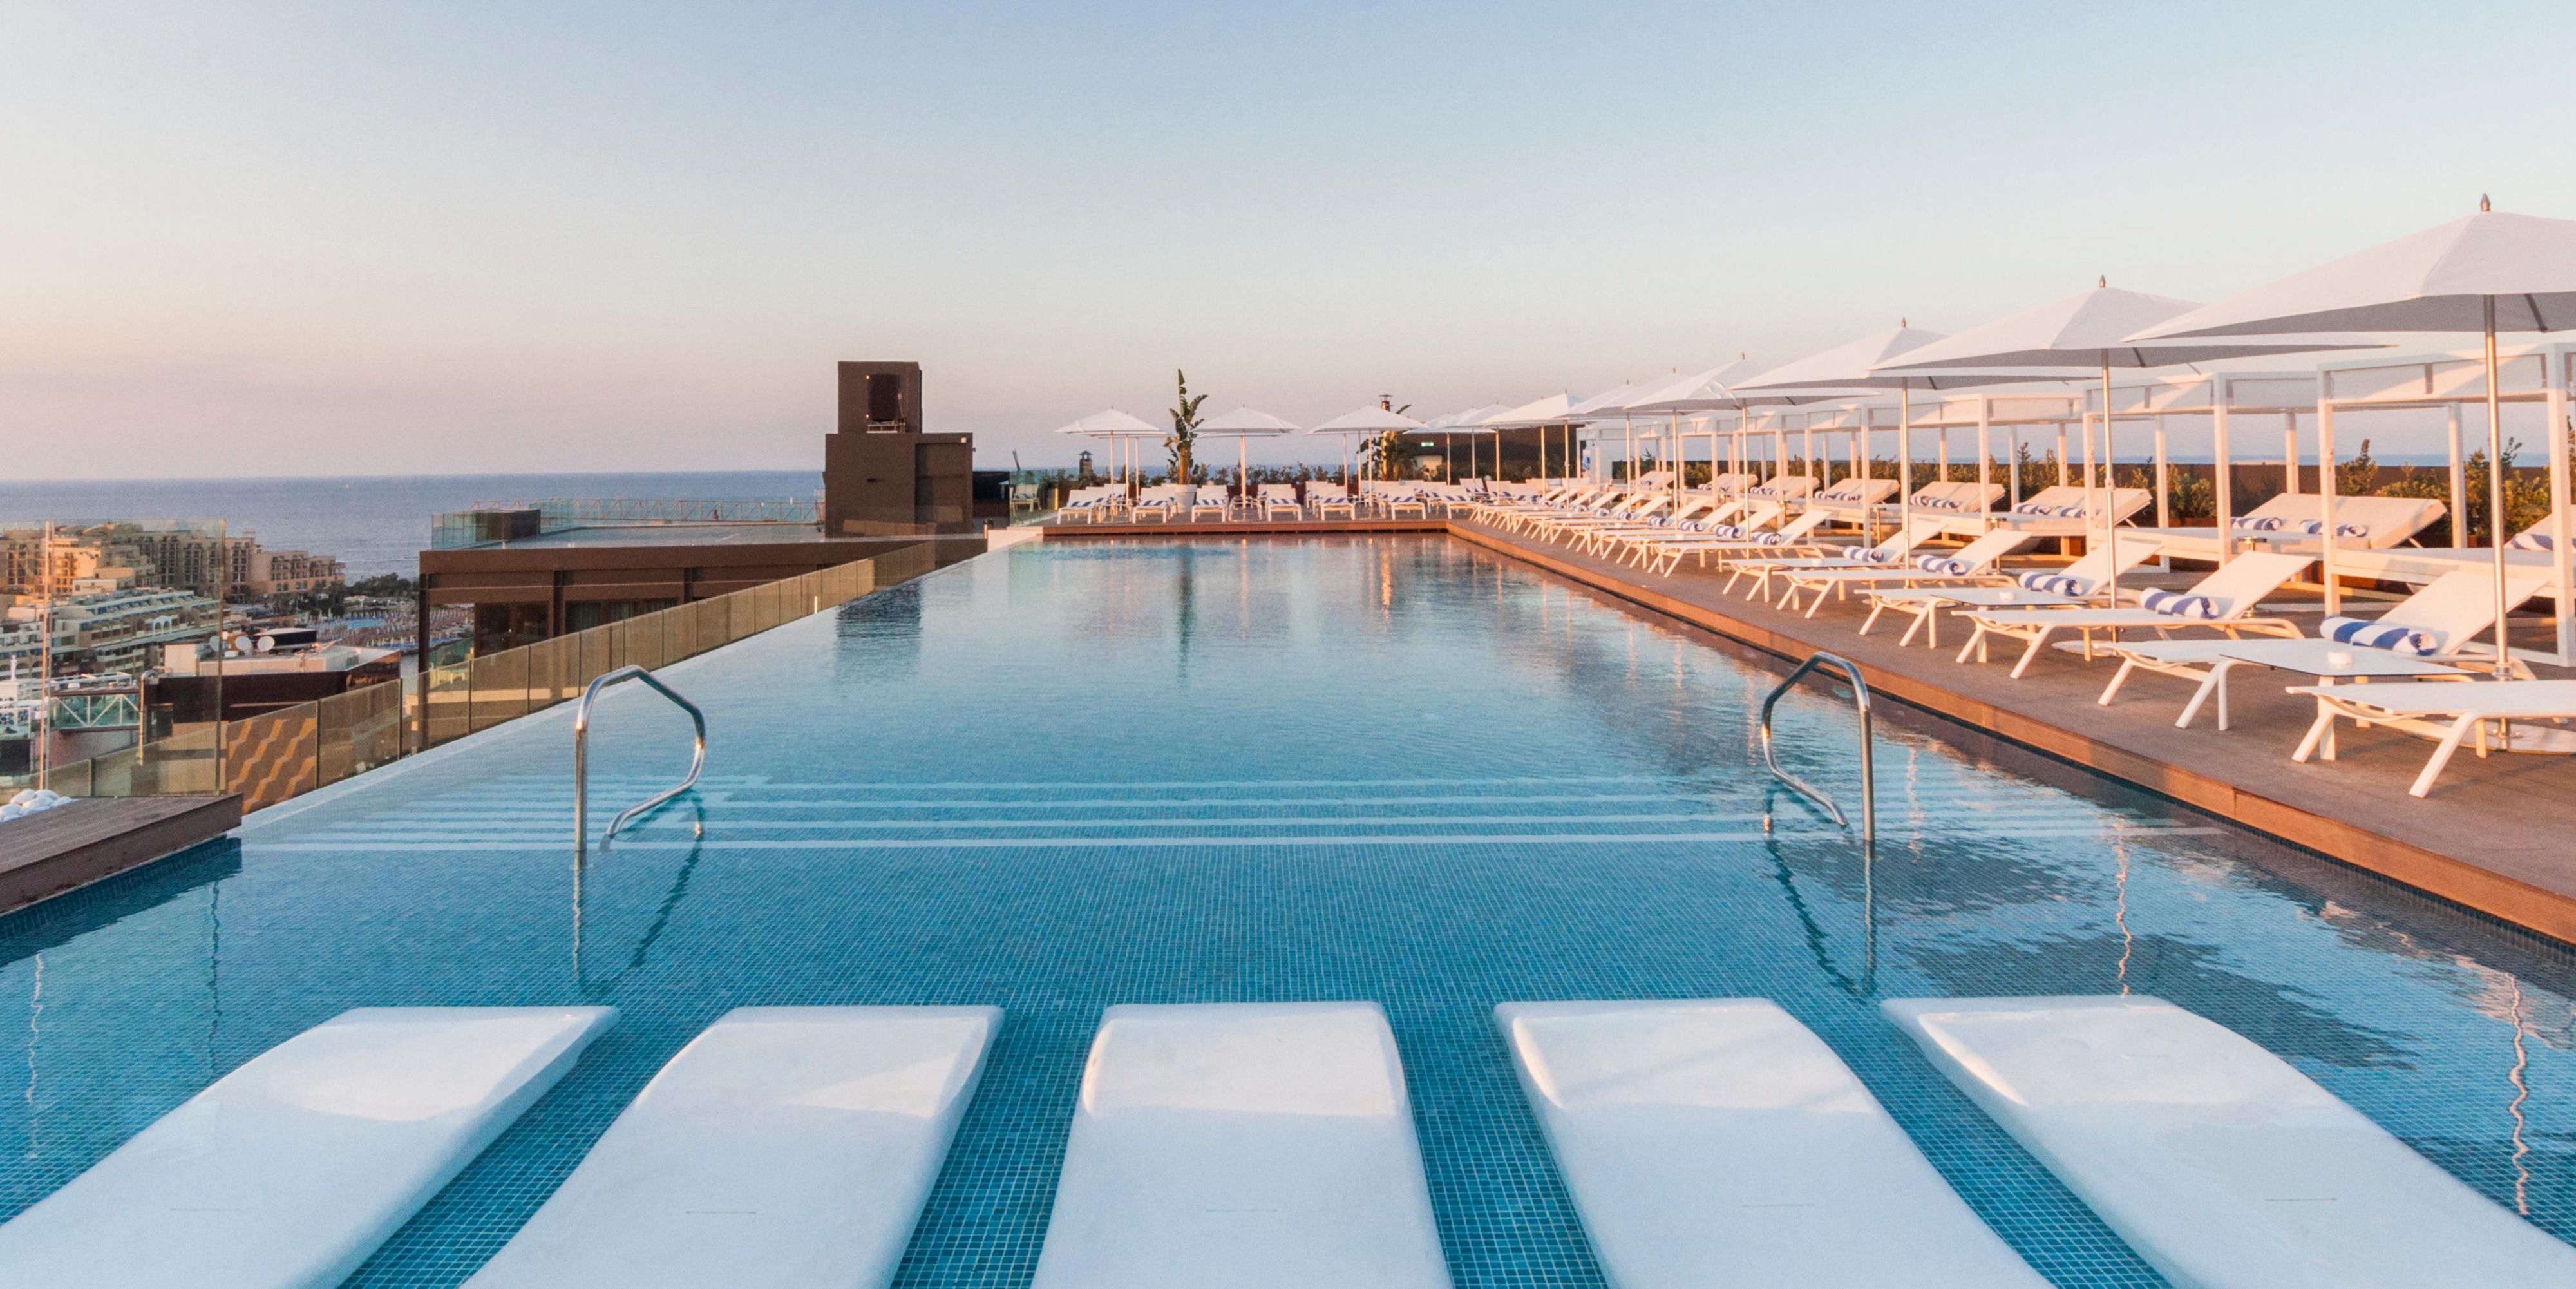 An unforgettable experience awaits at the SKYBEACH Infinity Pool, located on the 19th floor overlooking Malta and the Mediterranean Sea. Enjoy a private bar and dining area as you take a dip in the spectacular infinity pool, with complimentary access for Suite Bookers.